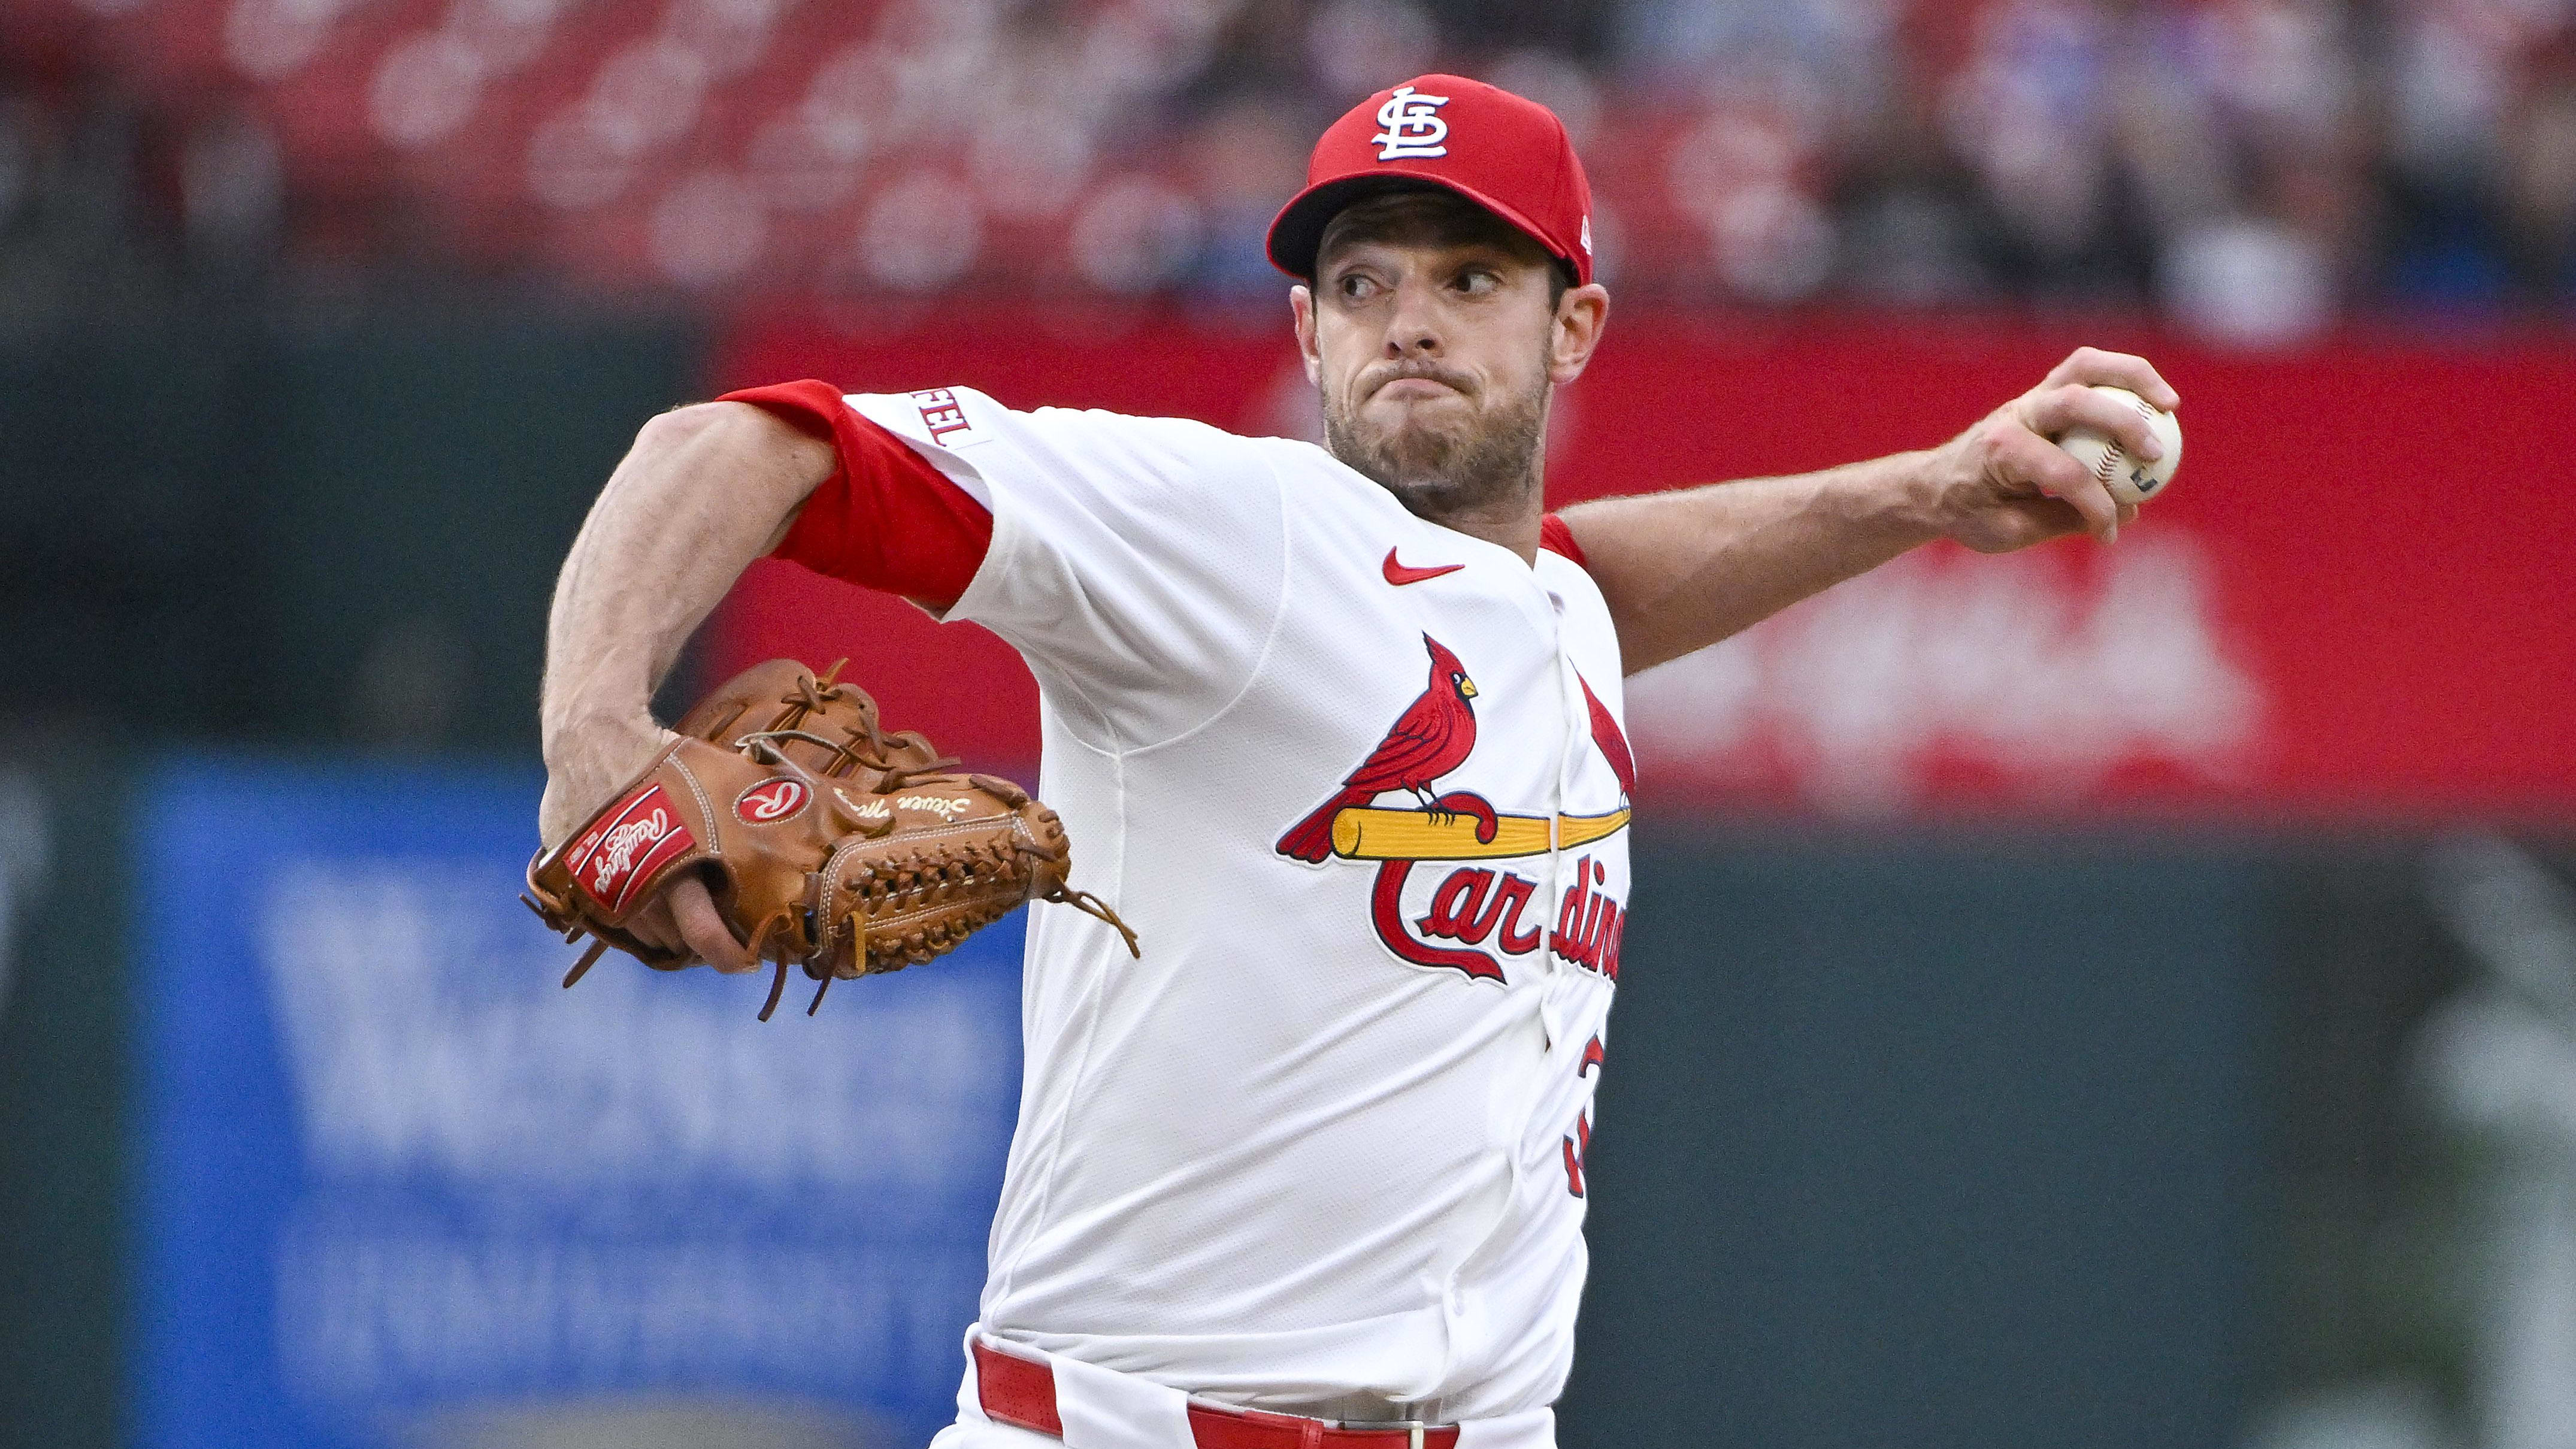 Cardinals Starter Dealing With Nagging Injury Possibly Explaining Struggles